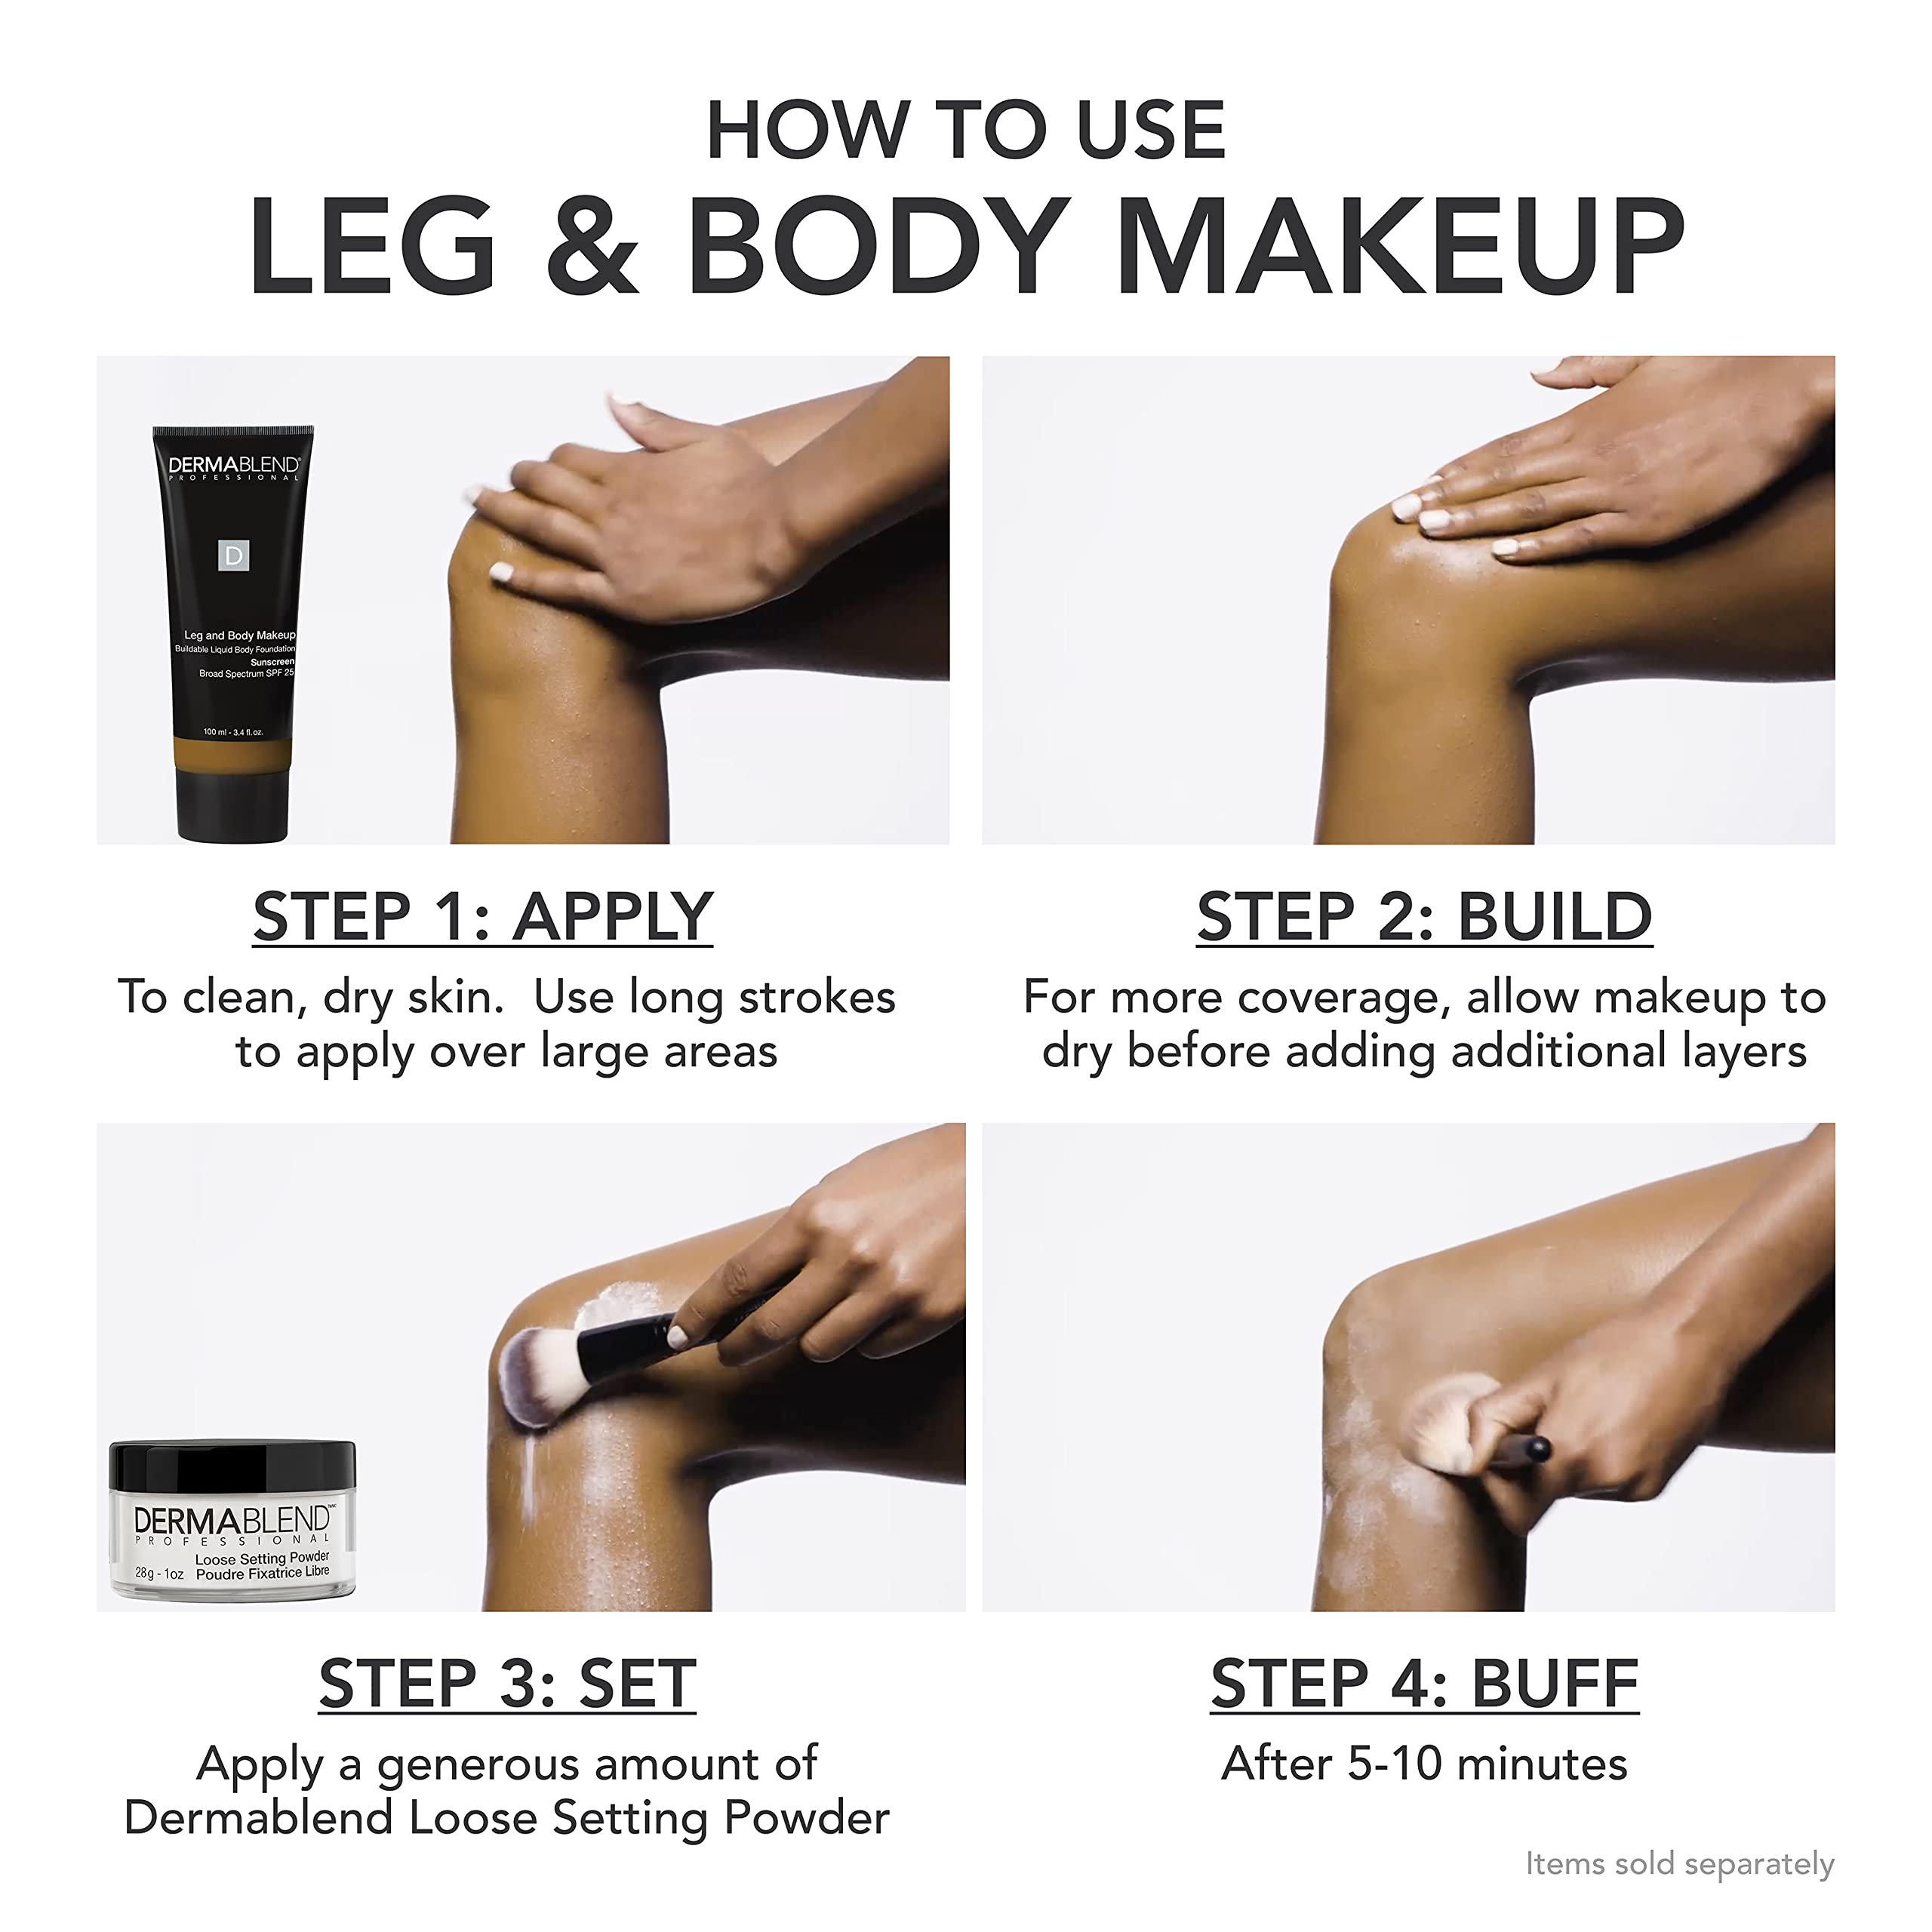 Dermablend Leg and Body Makeup Foundation with SPF 25, 85N Deep Natural, 3.4 Fl. Oz.